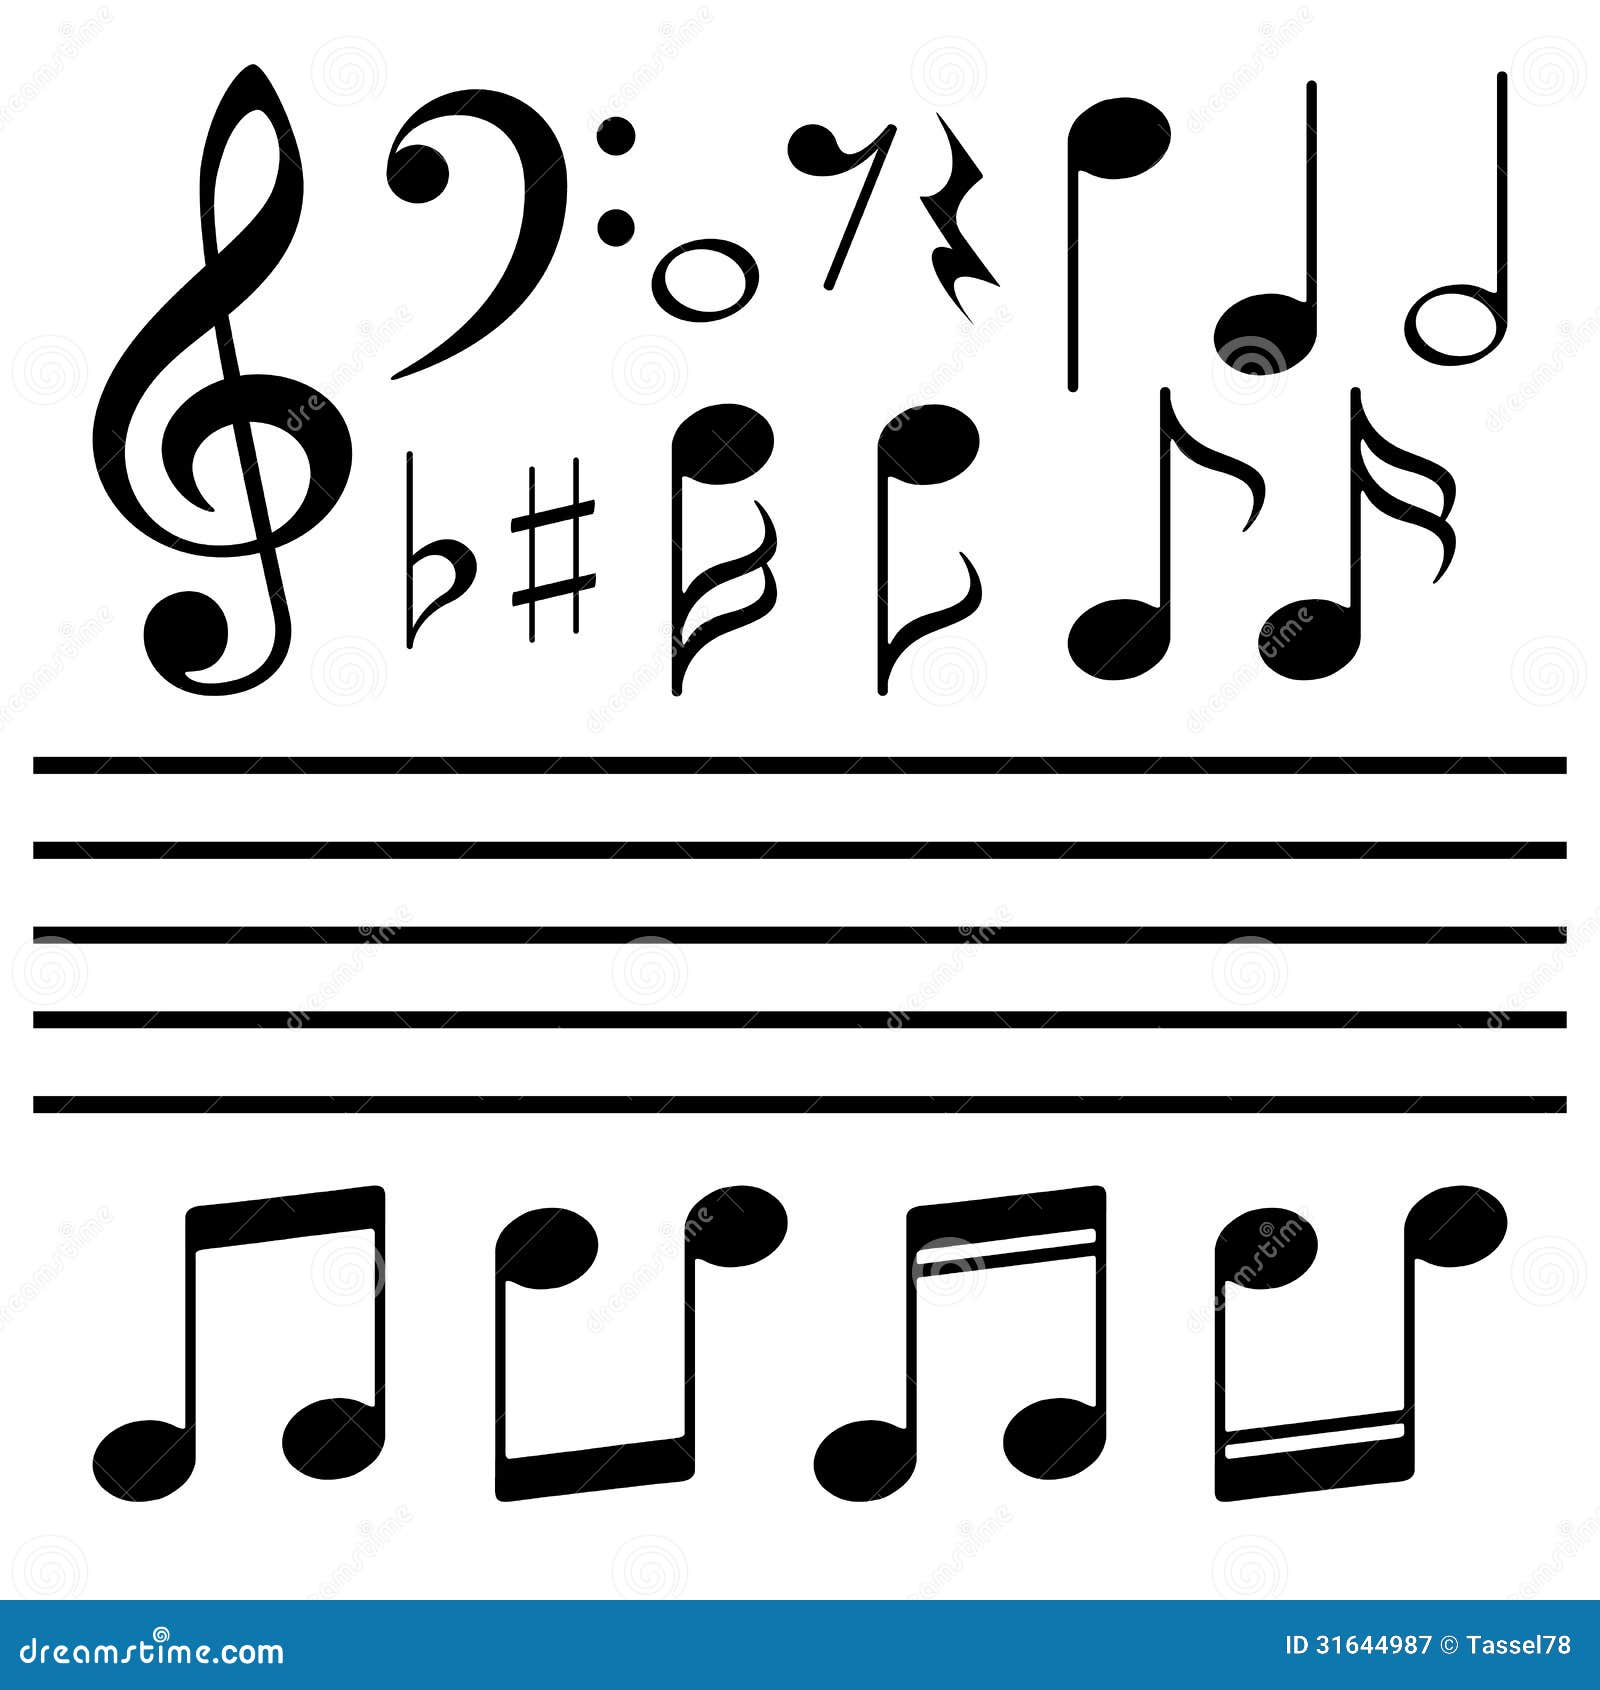 vector free download music notes - photo #47